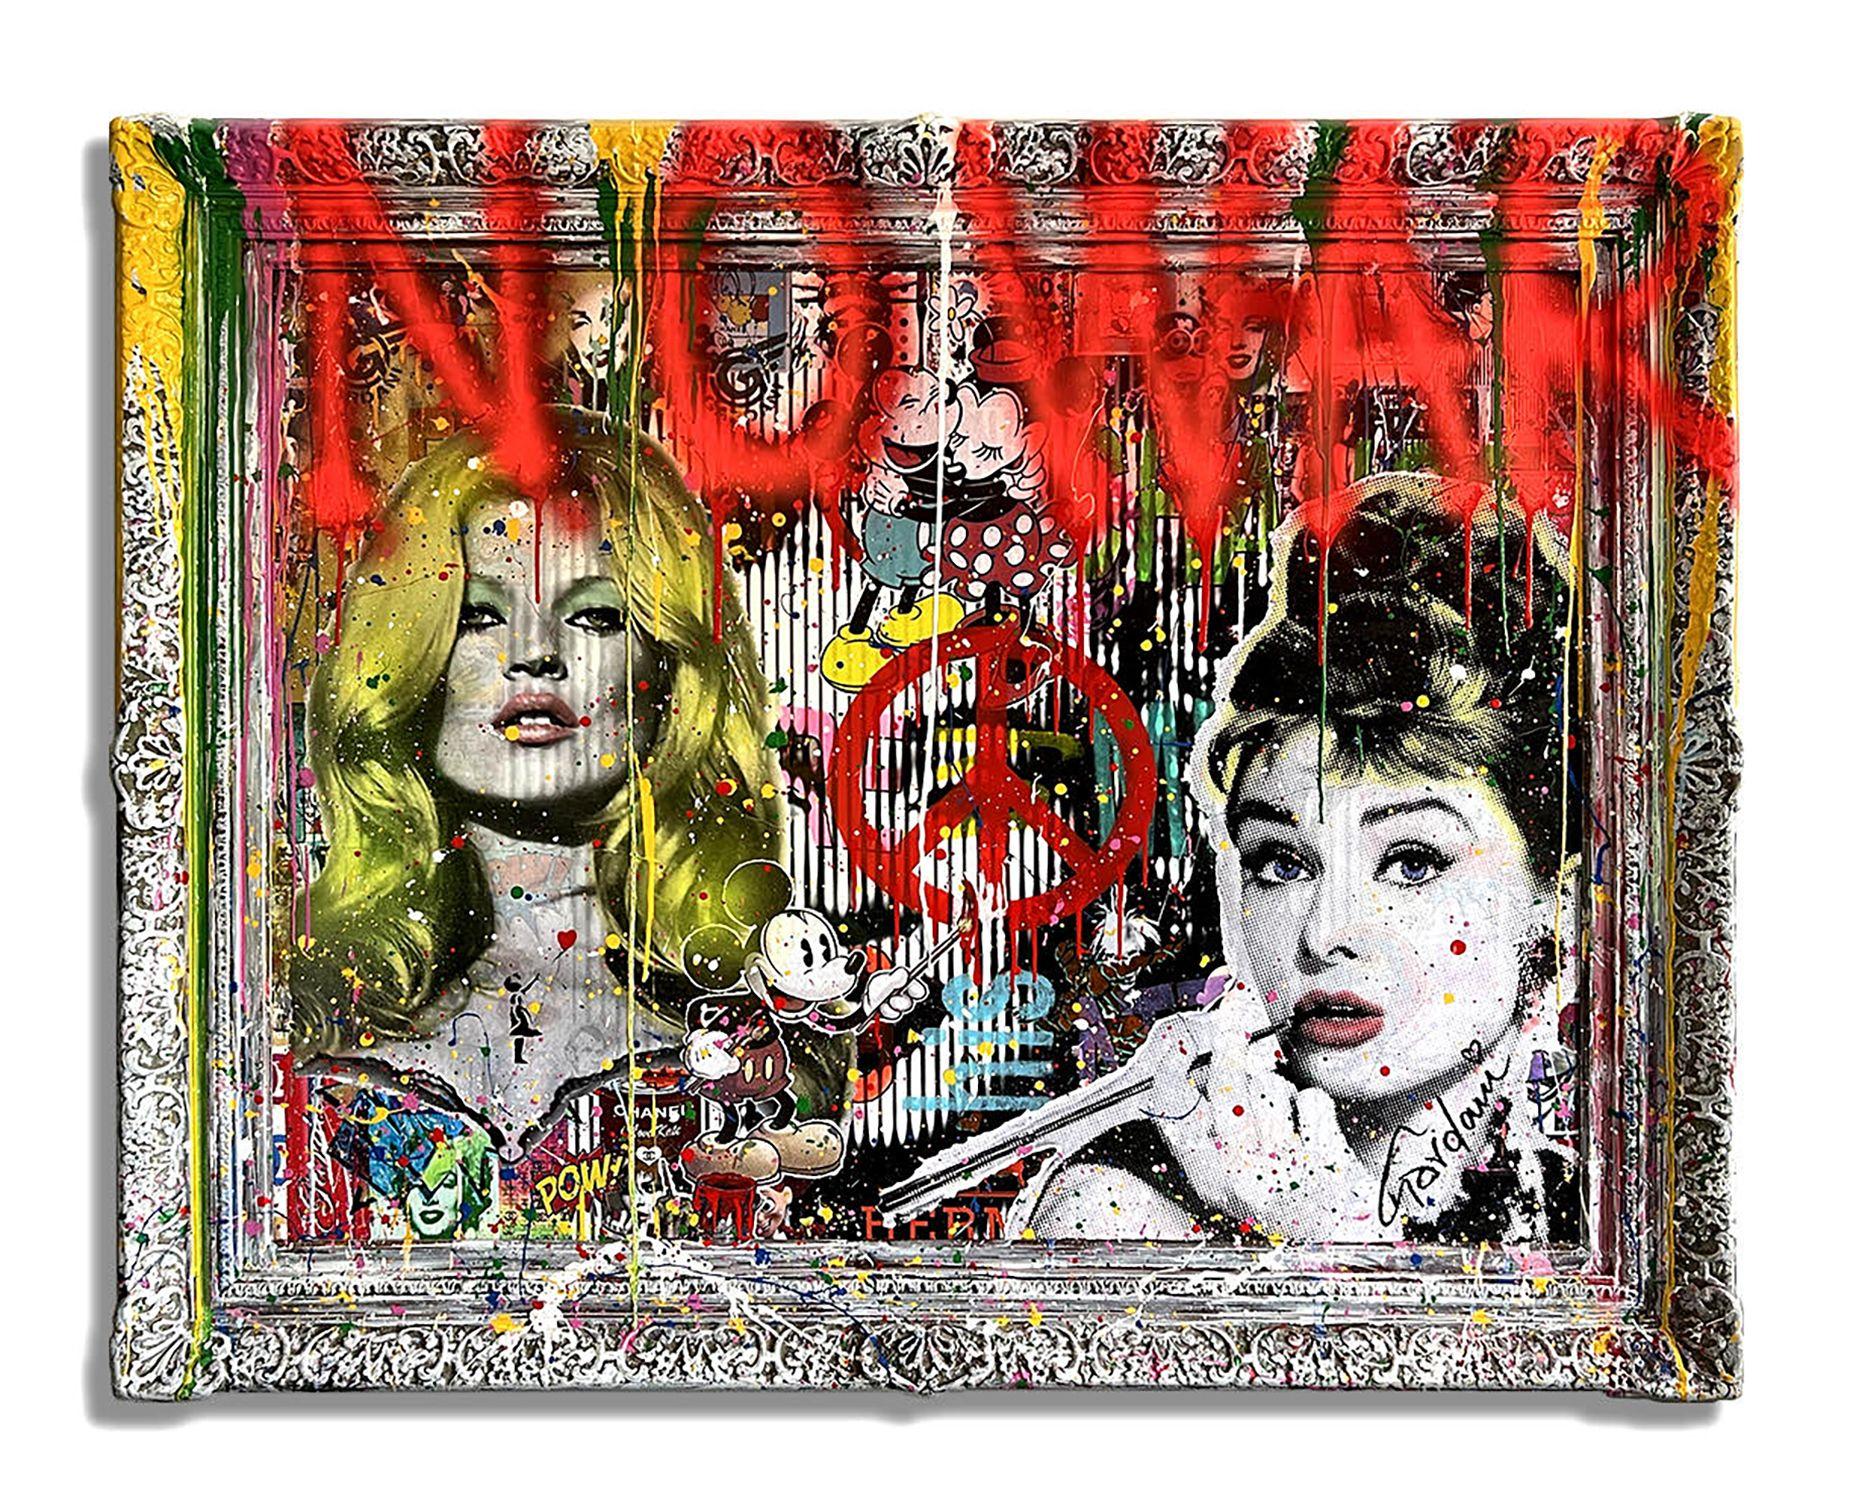 Medium: Mix media, silk screening, hand finished with Oil, Acrylic, stencils,  spray paint, Collage with old iconography images, newspapers, comic books, magazines and text on canvas.    Movement & Style: Pop Art, Contemporary Art    Frame Size: 46